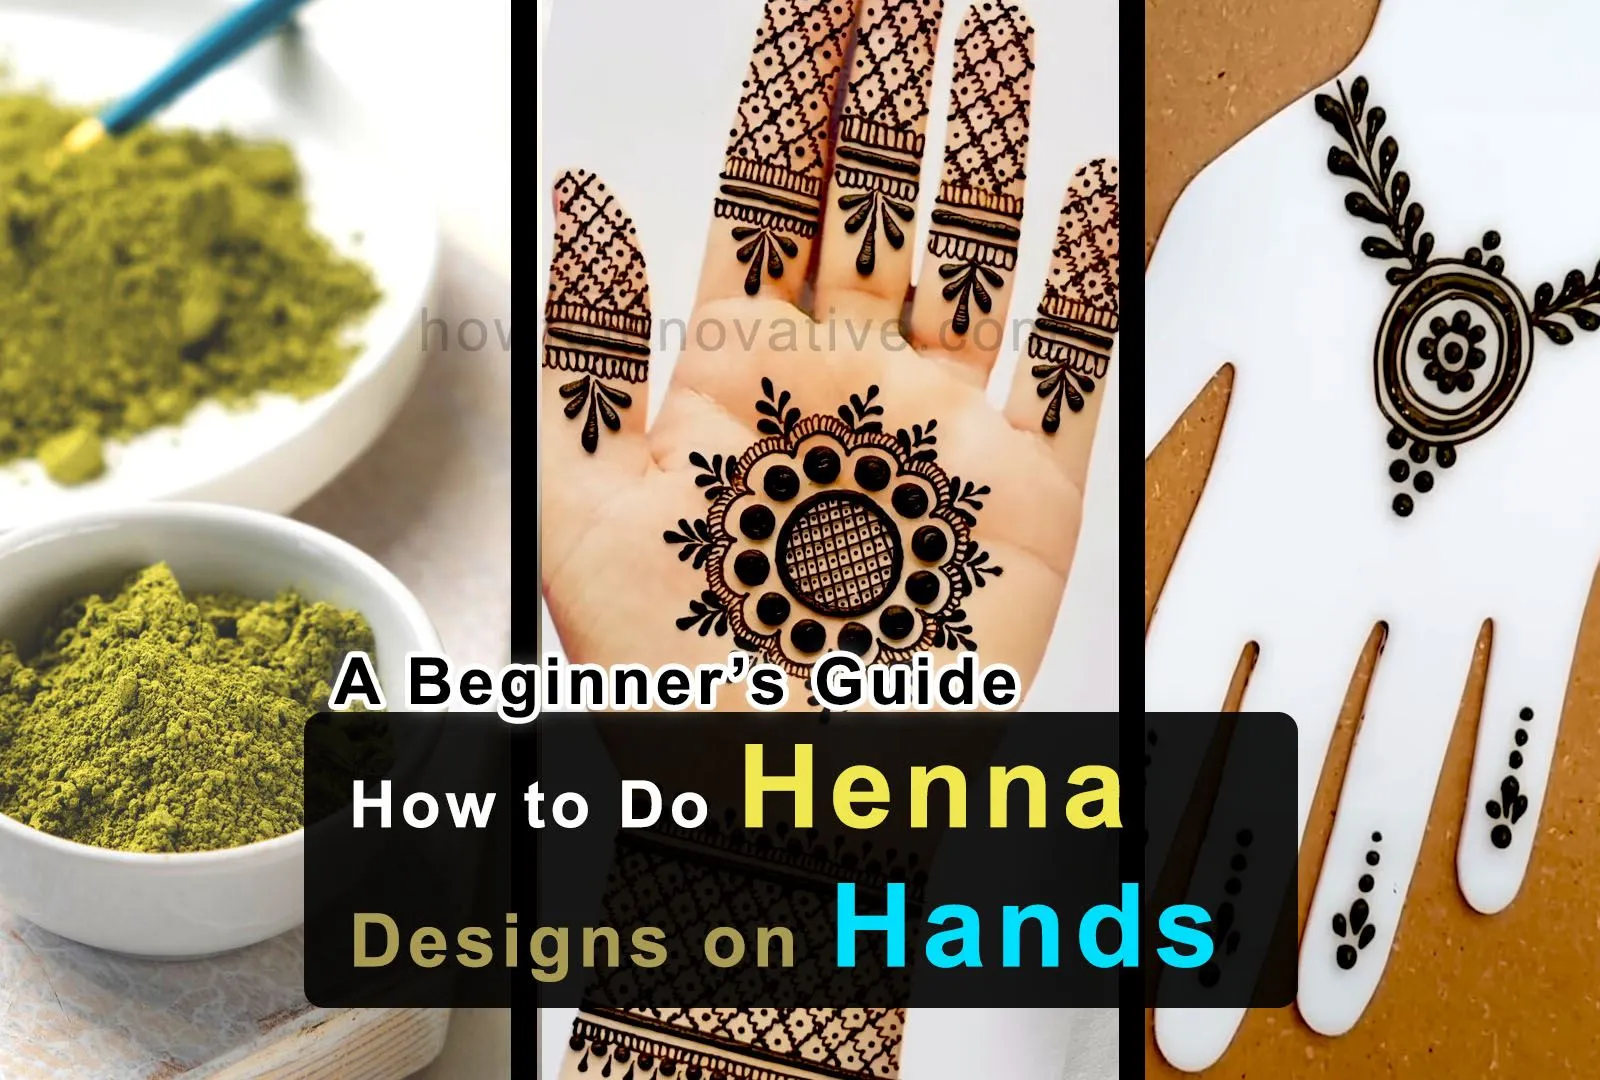 How to Do Henna Designs on Hands A Beginner’s Guide